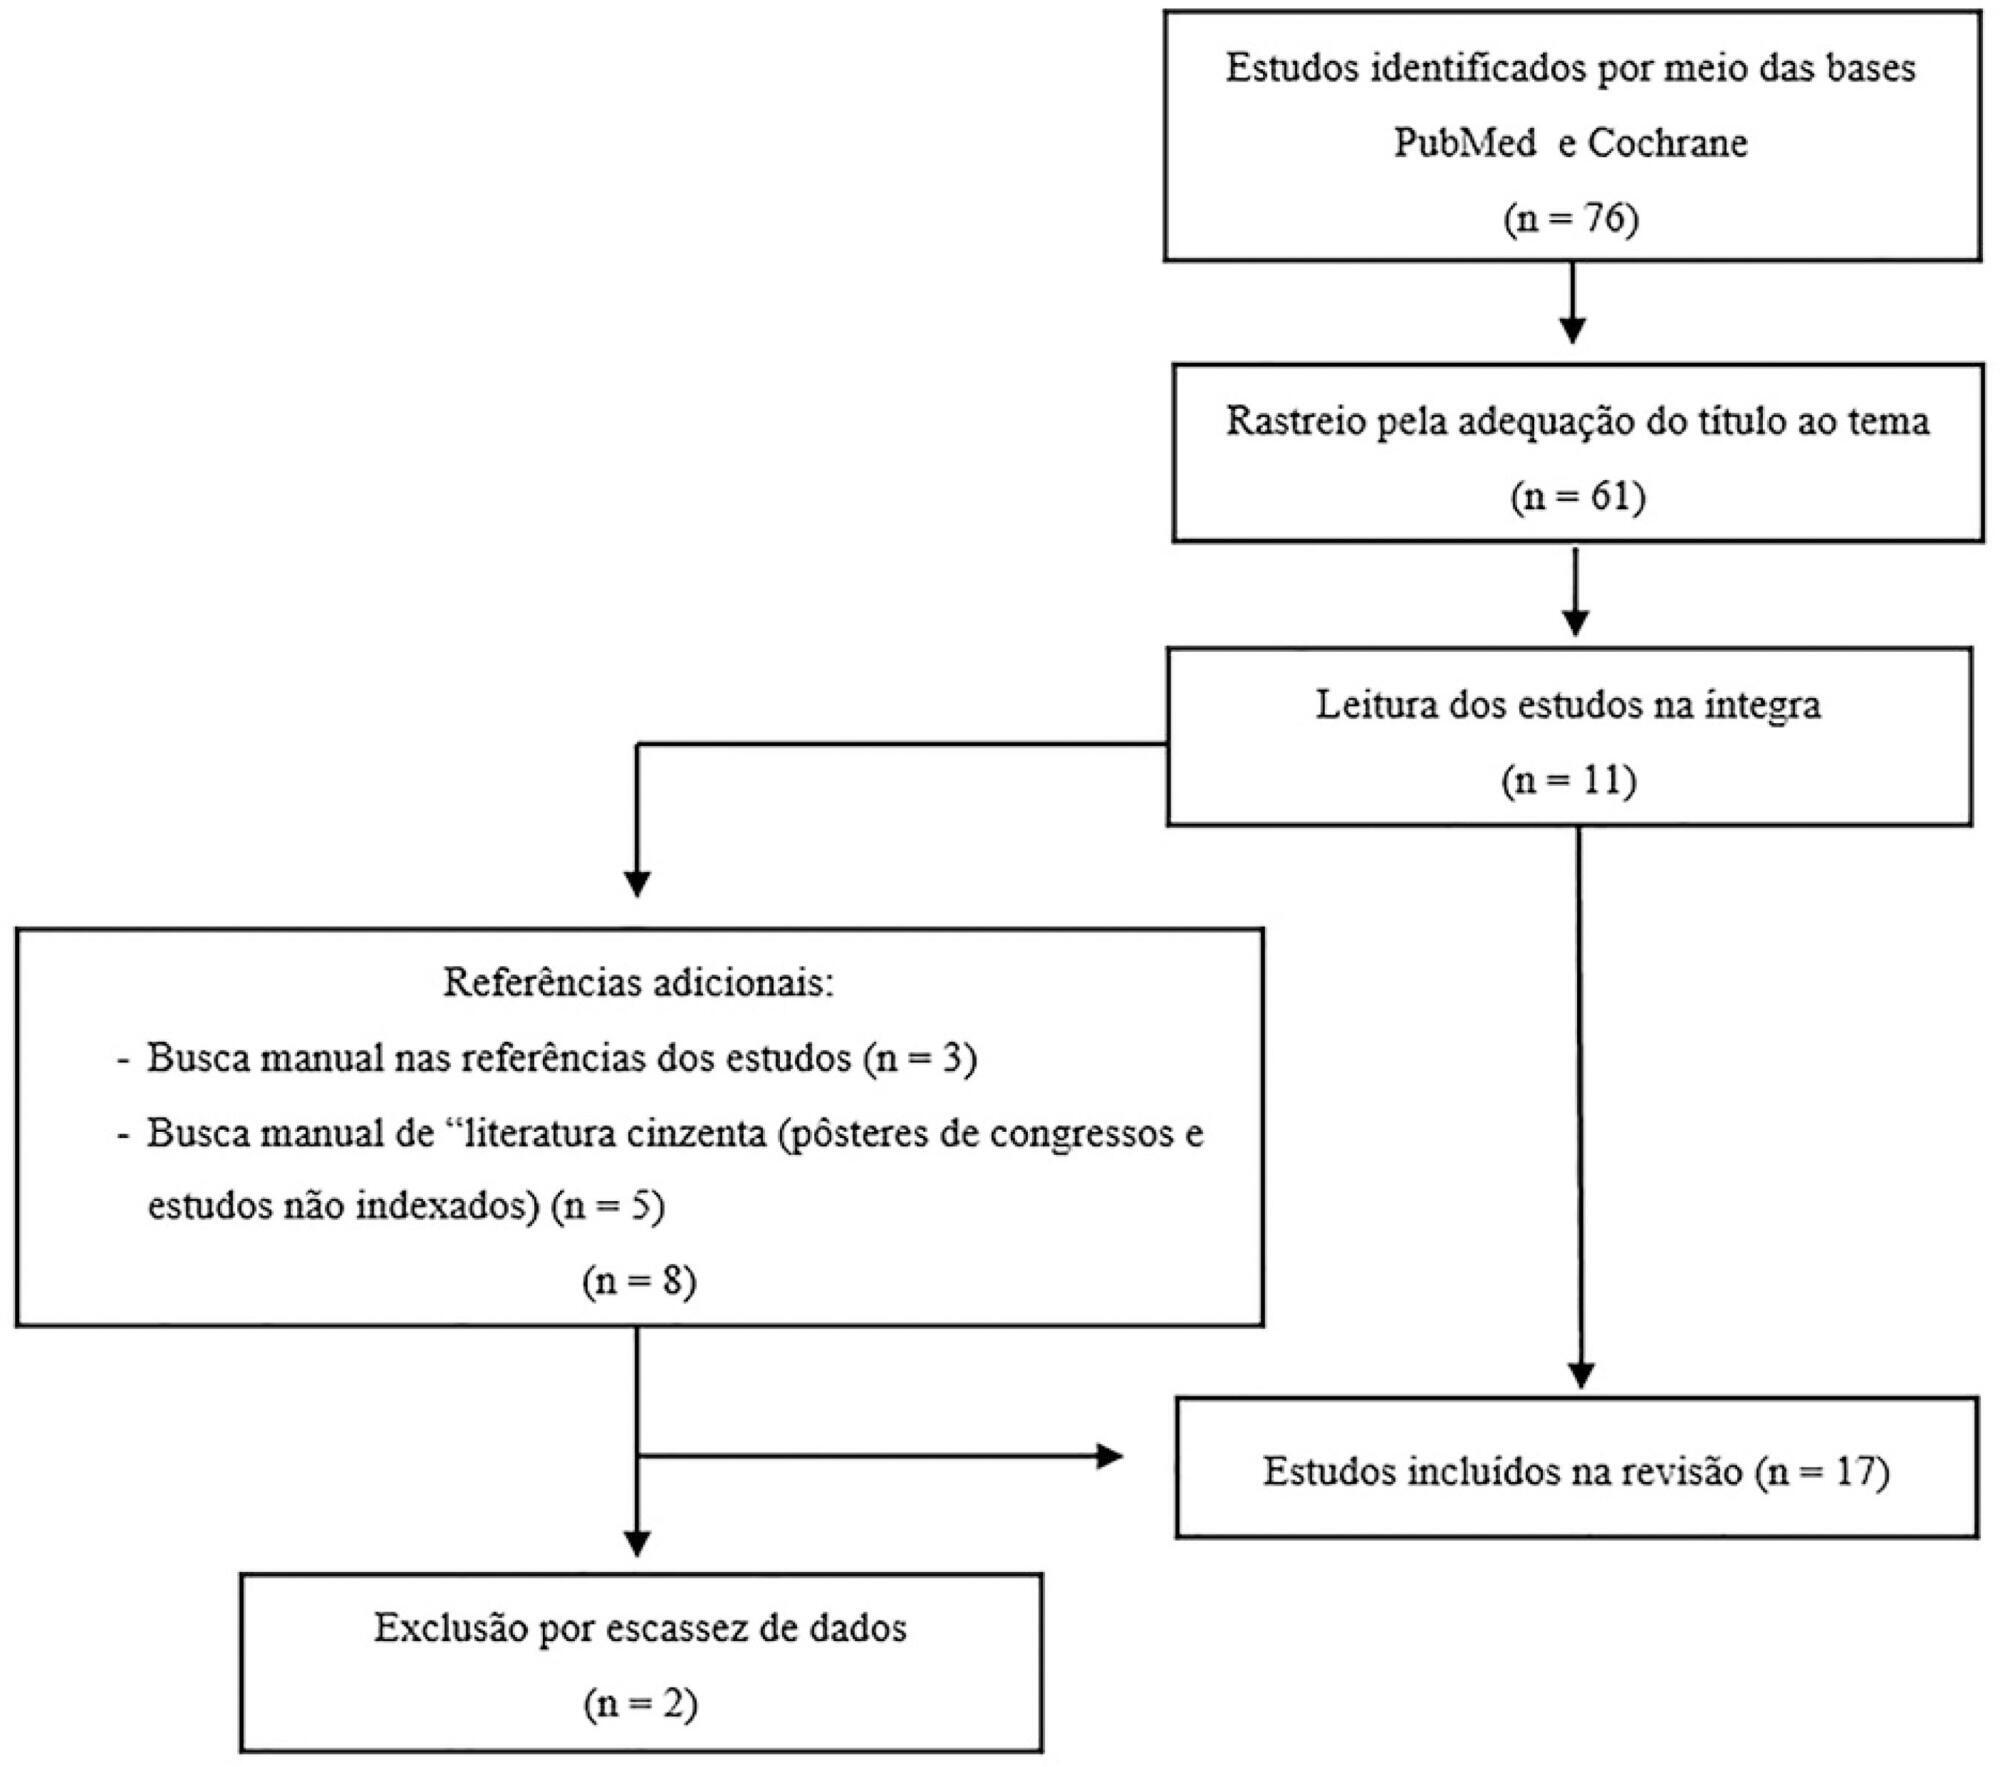 Apnea test for brain death diagnosis in adults on extracorporeal membrane oxygenation: a review